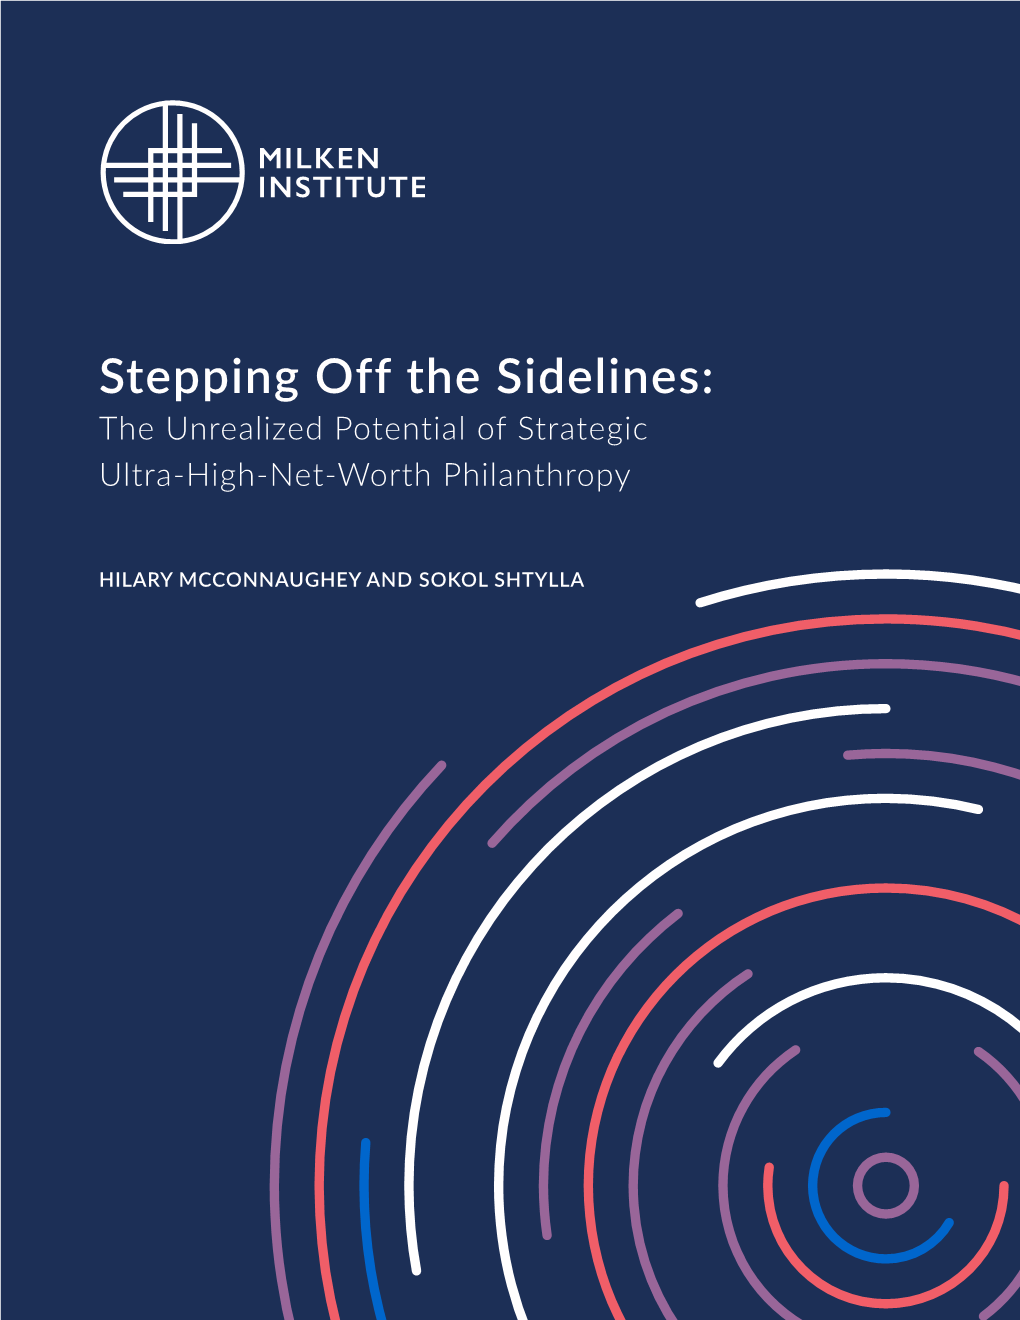 Stepping Off the Sidelines: the Unrealized Potential of Strategic Ultra-High-Net-Worth Philanthropy